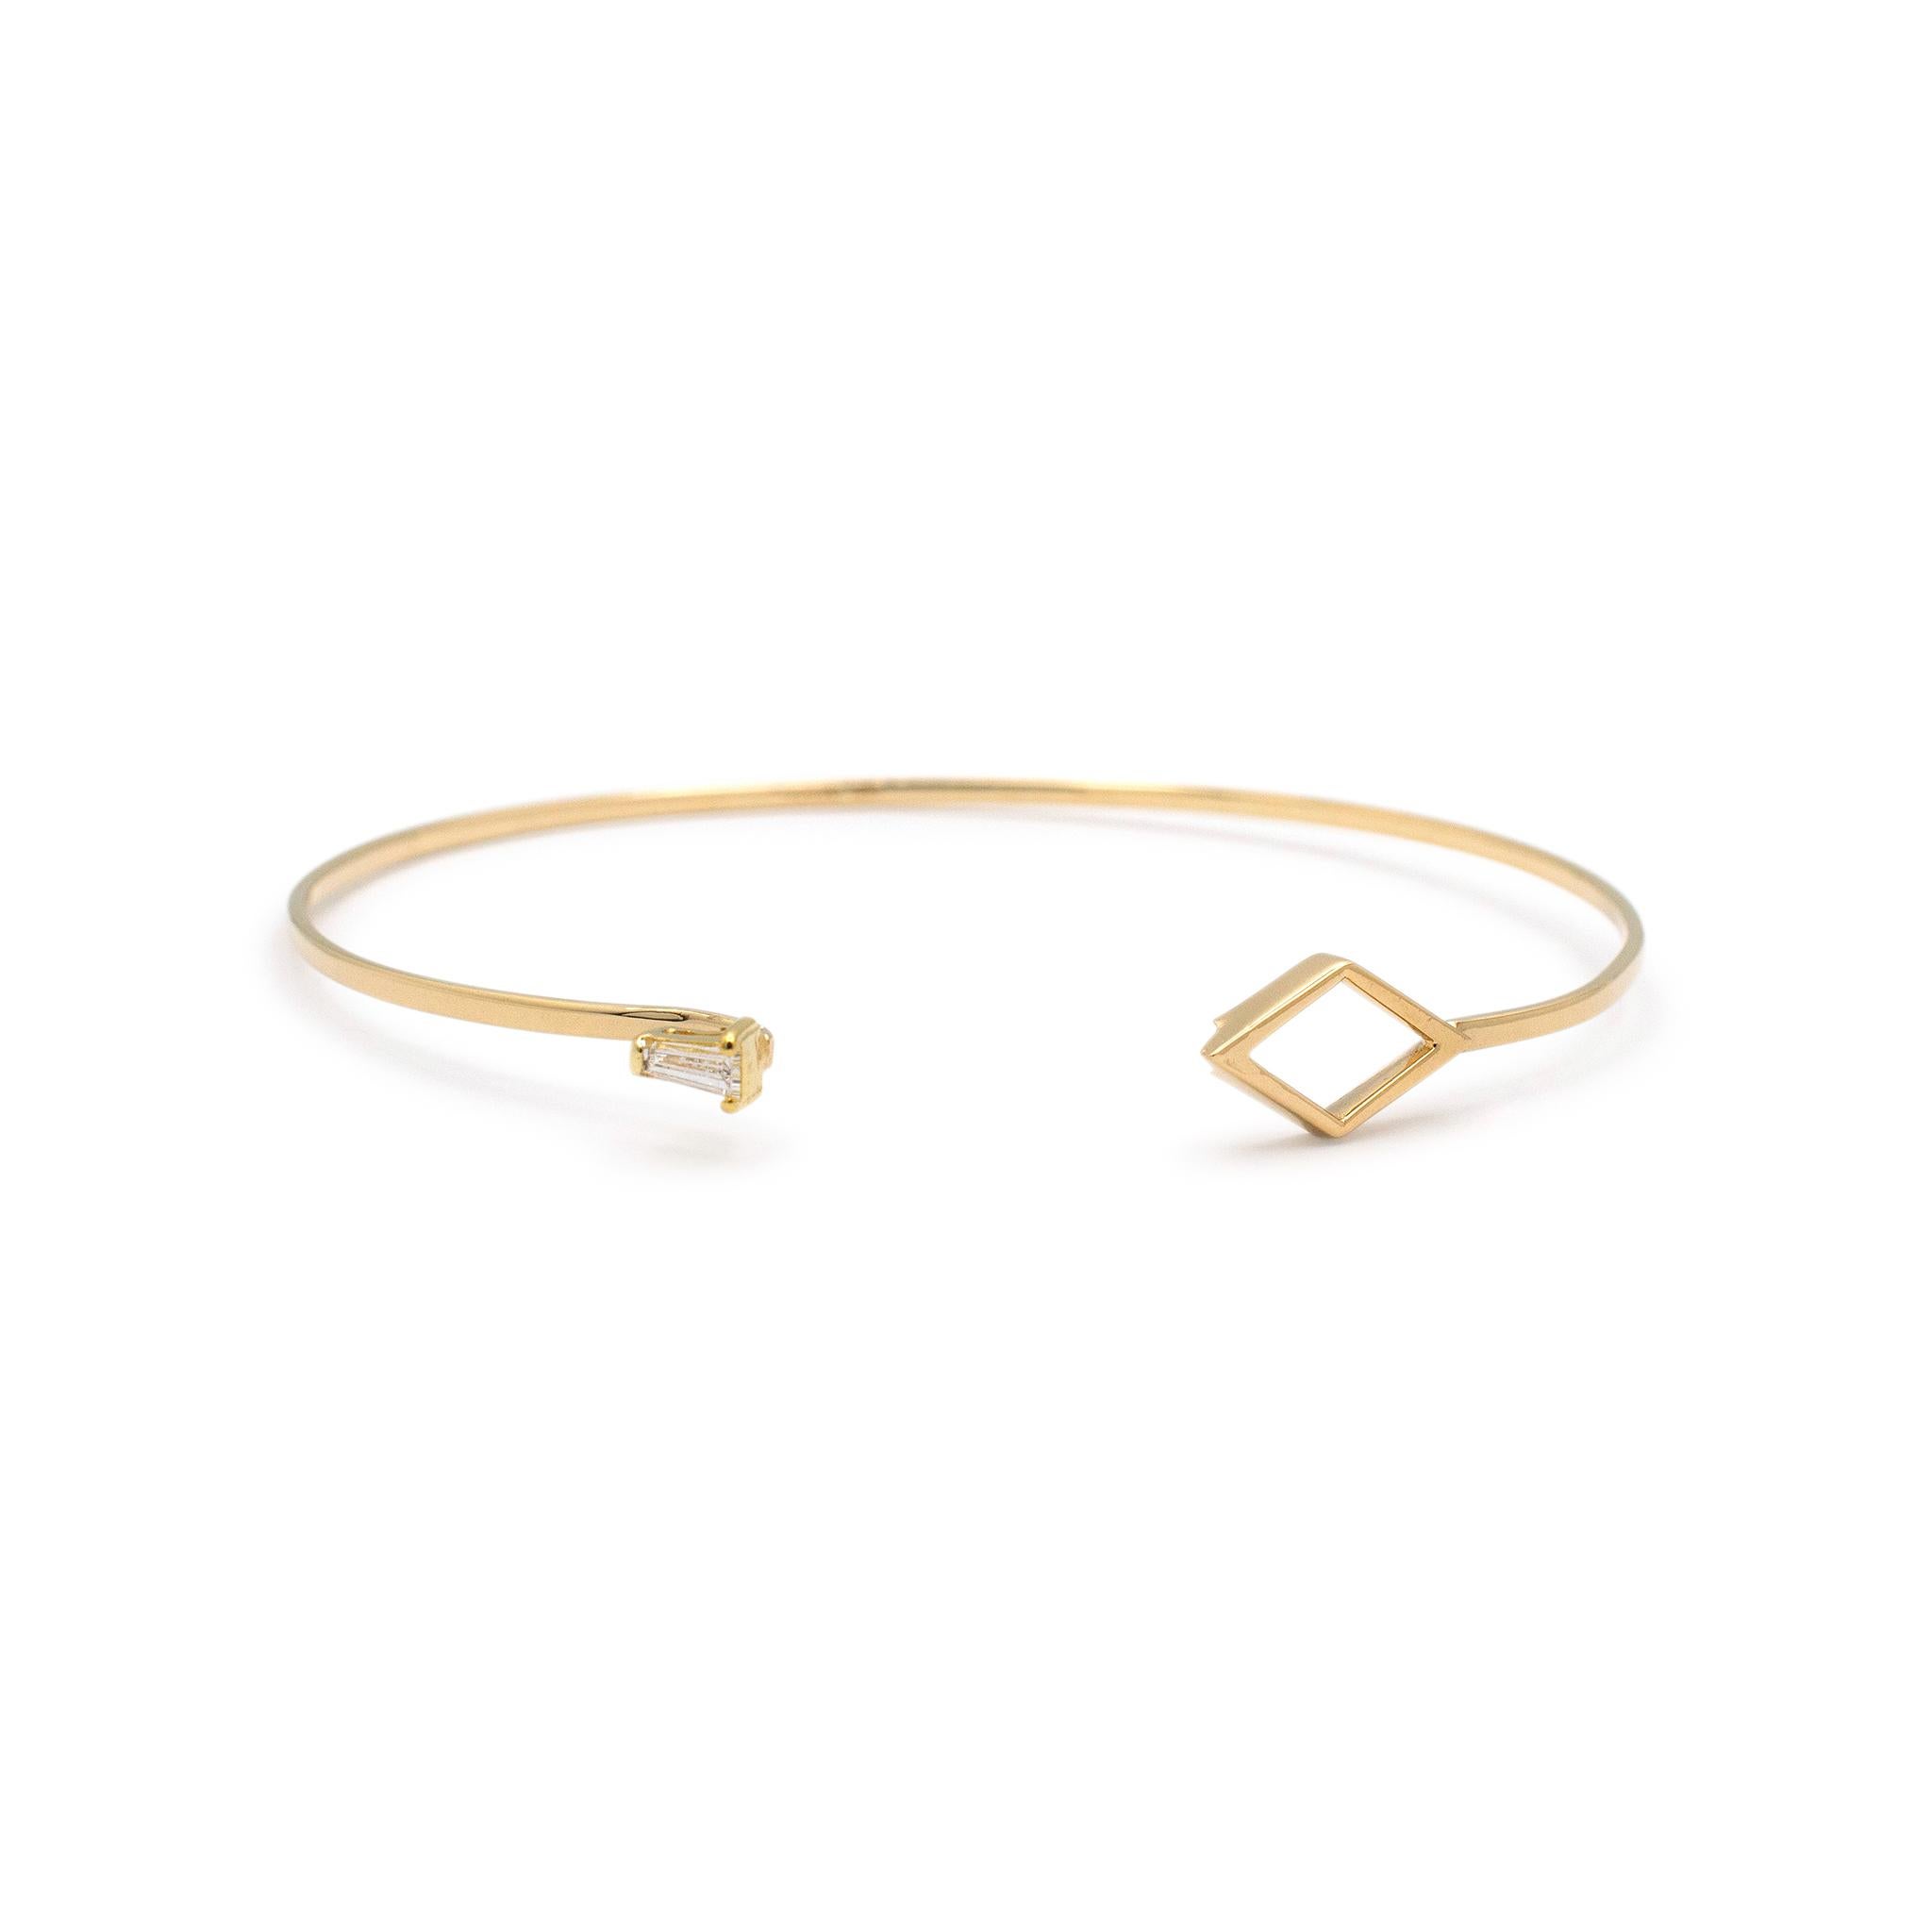 Gender: Ladies

Metal Type: 14K Yellow Gold

Length: 6.75 inches

Width: 1.70 mm

Rhombus Measurements: 15.00mm x 8.15mm

Weight:  4.56 grams

14K yellow gold diamond bangle bracelet. The metal was tested and determined to be 14K yellow gold.